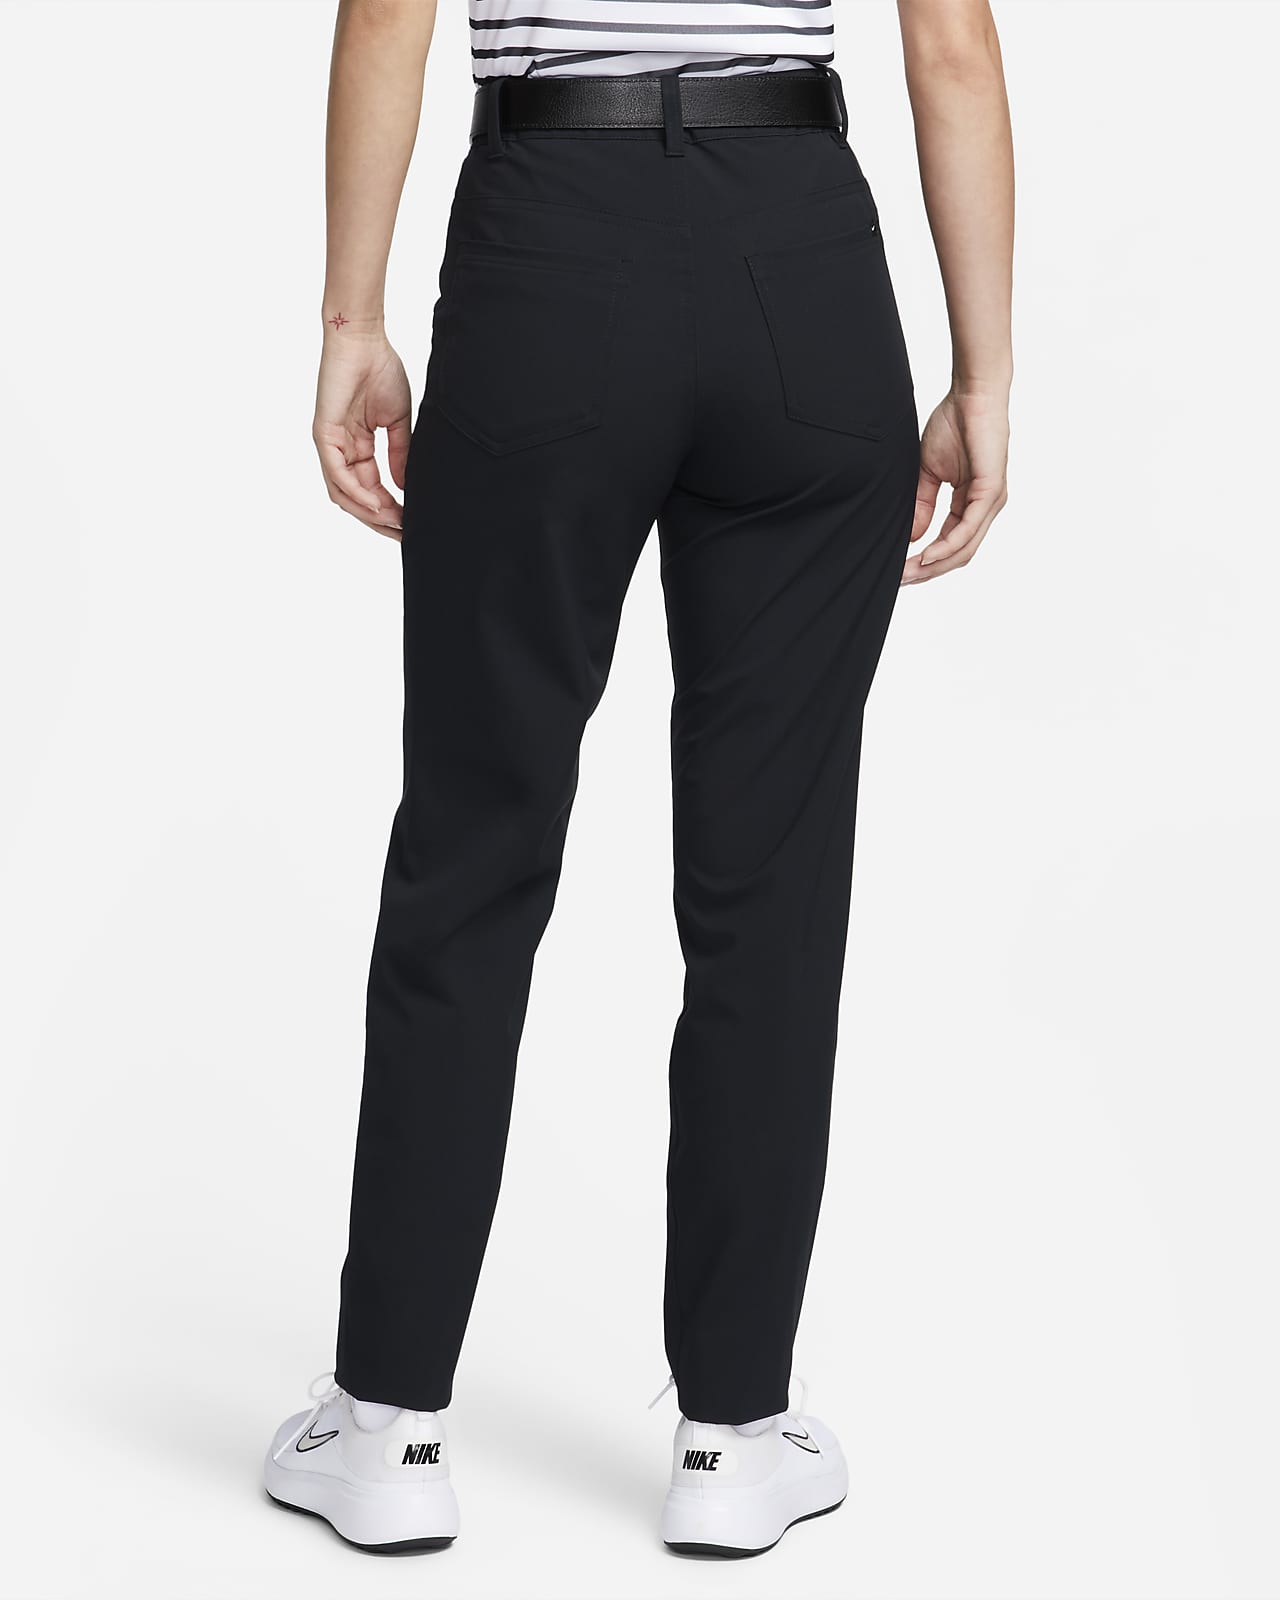 https://static.nike.com/a/images/t_PDP_1280_v1/f_auto,q_auto:eco/7e5b885f-ff42-4830-b96d-065f225fb9cc/tour-repel-slim-fit-golf-trousers-xCPfPR.png